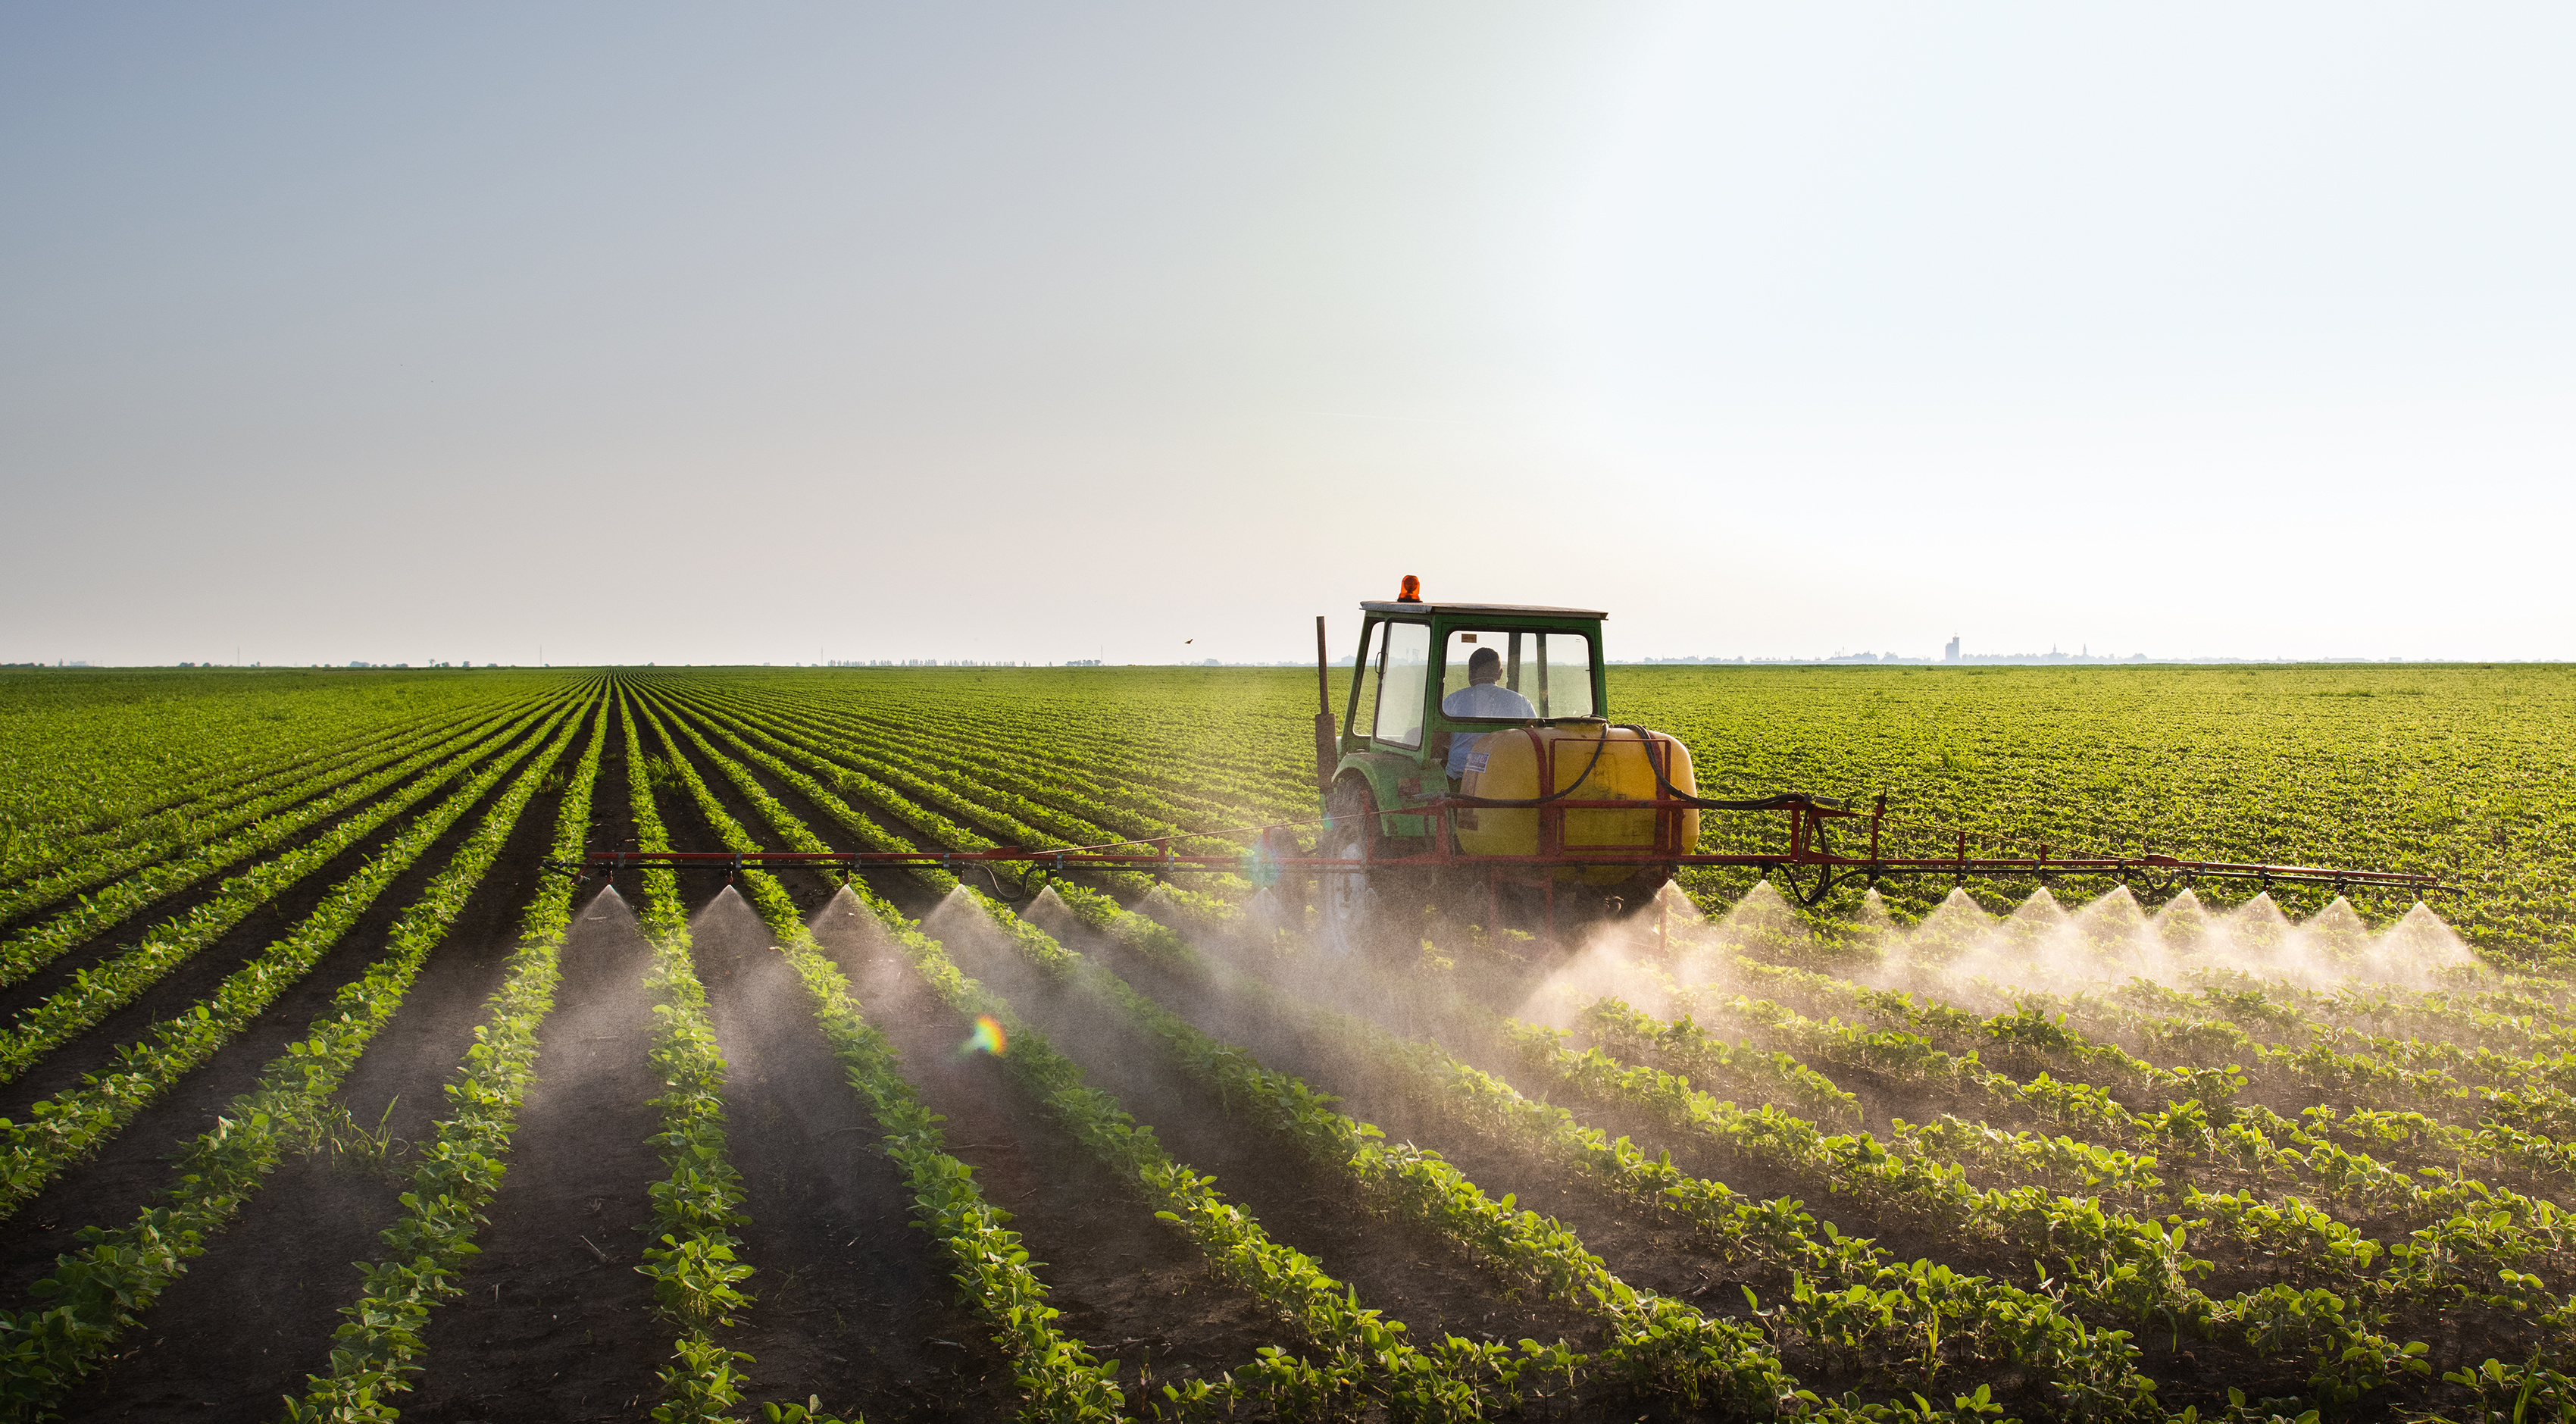 A tractor sprays pesticides on an agricultural field